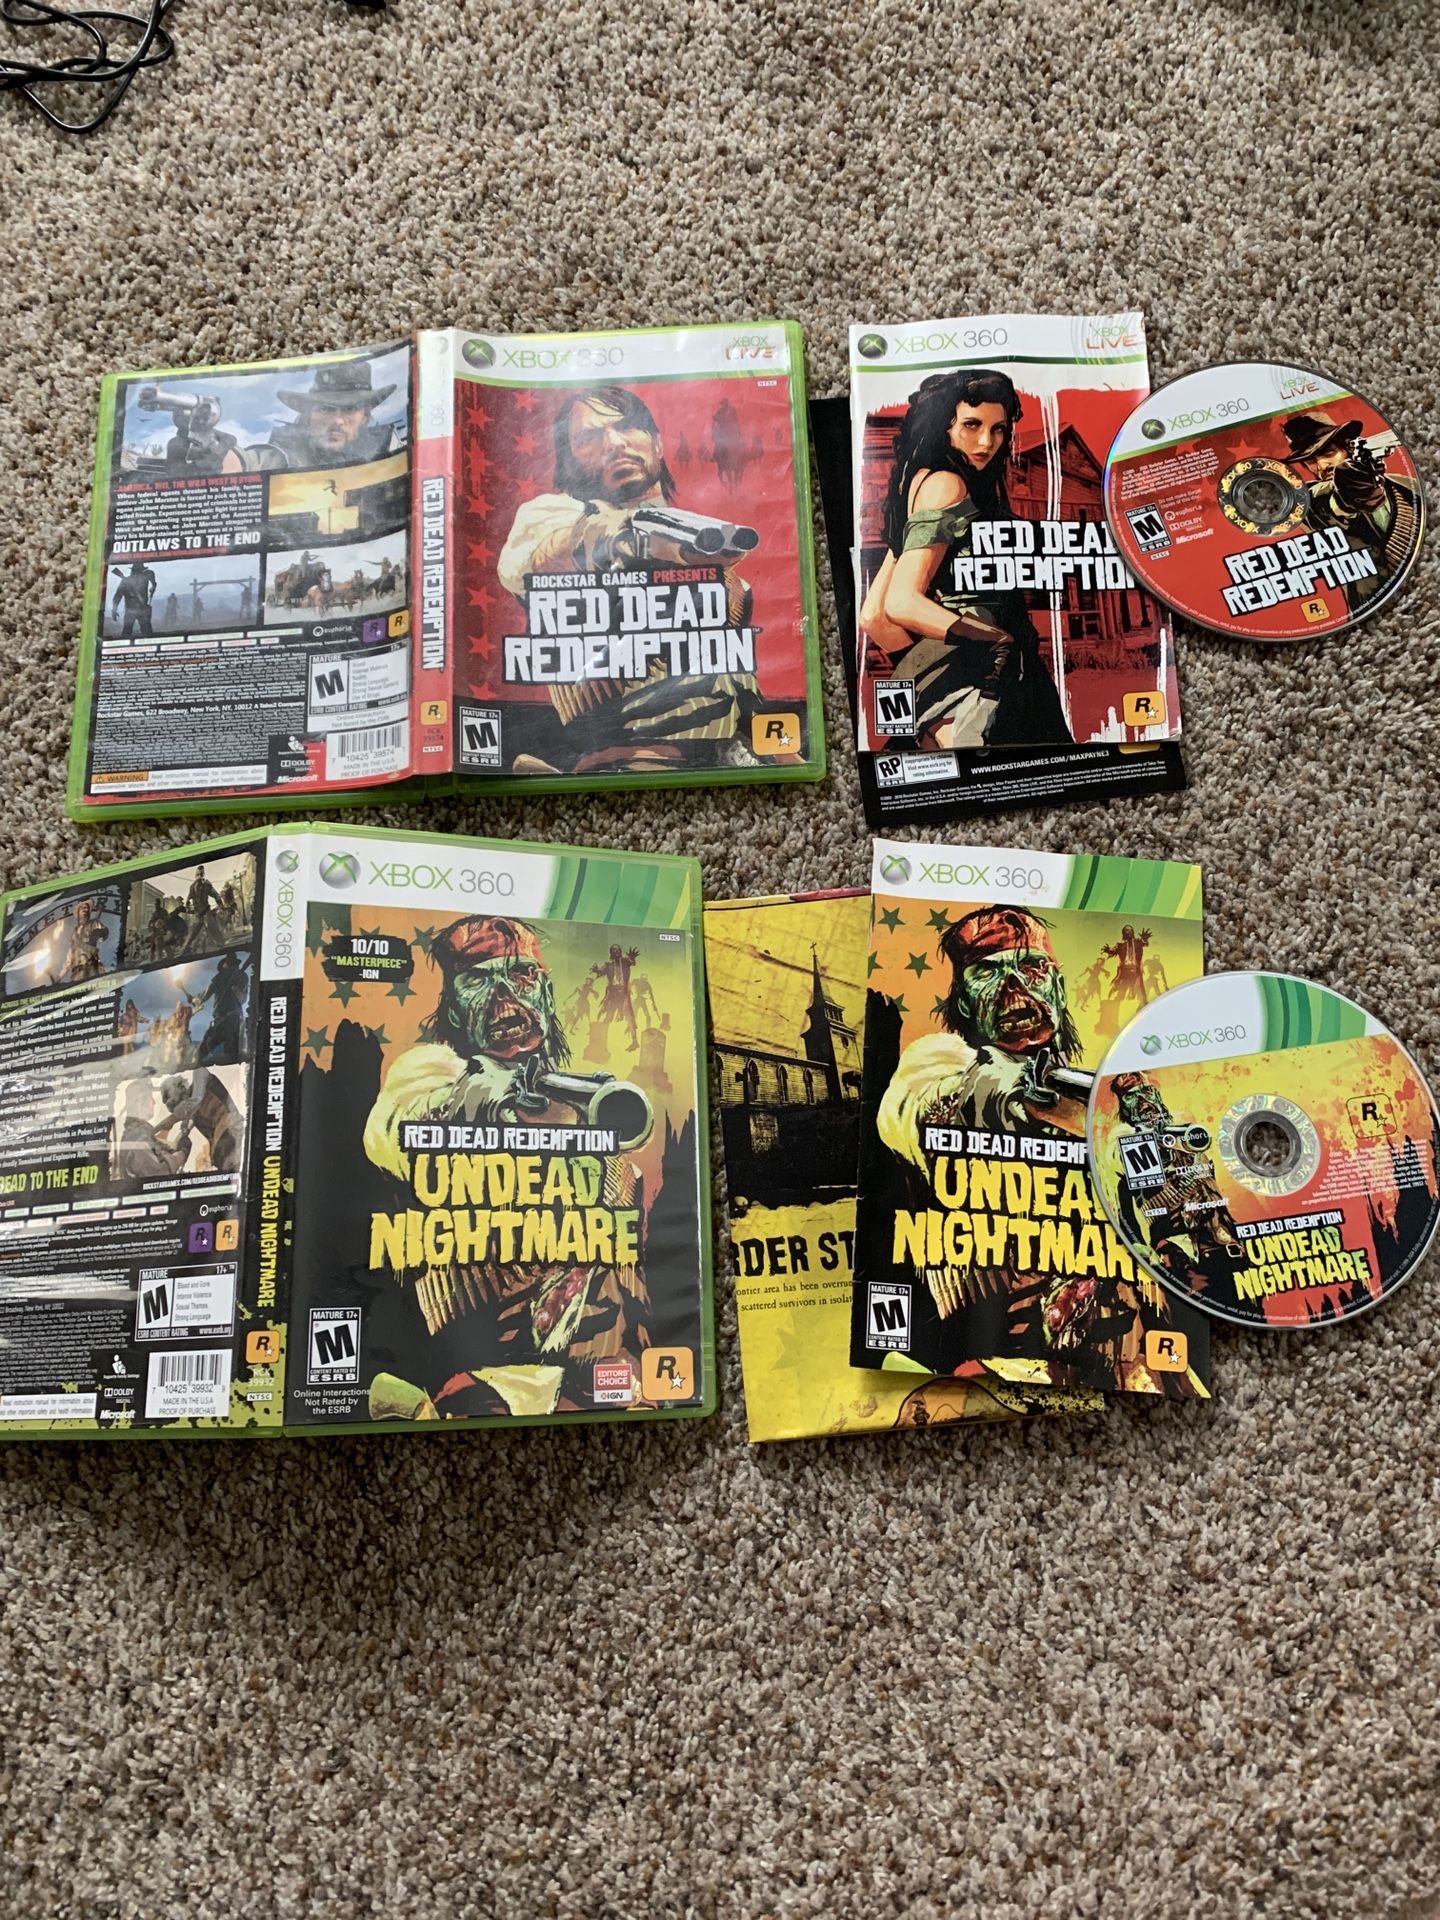 Red dead redemption & undead nightmare Xbox 360